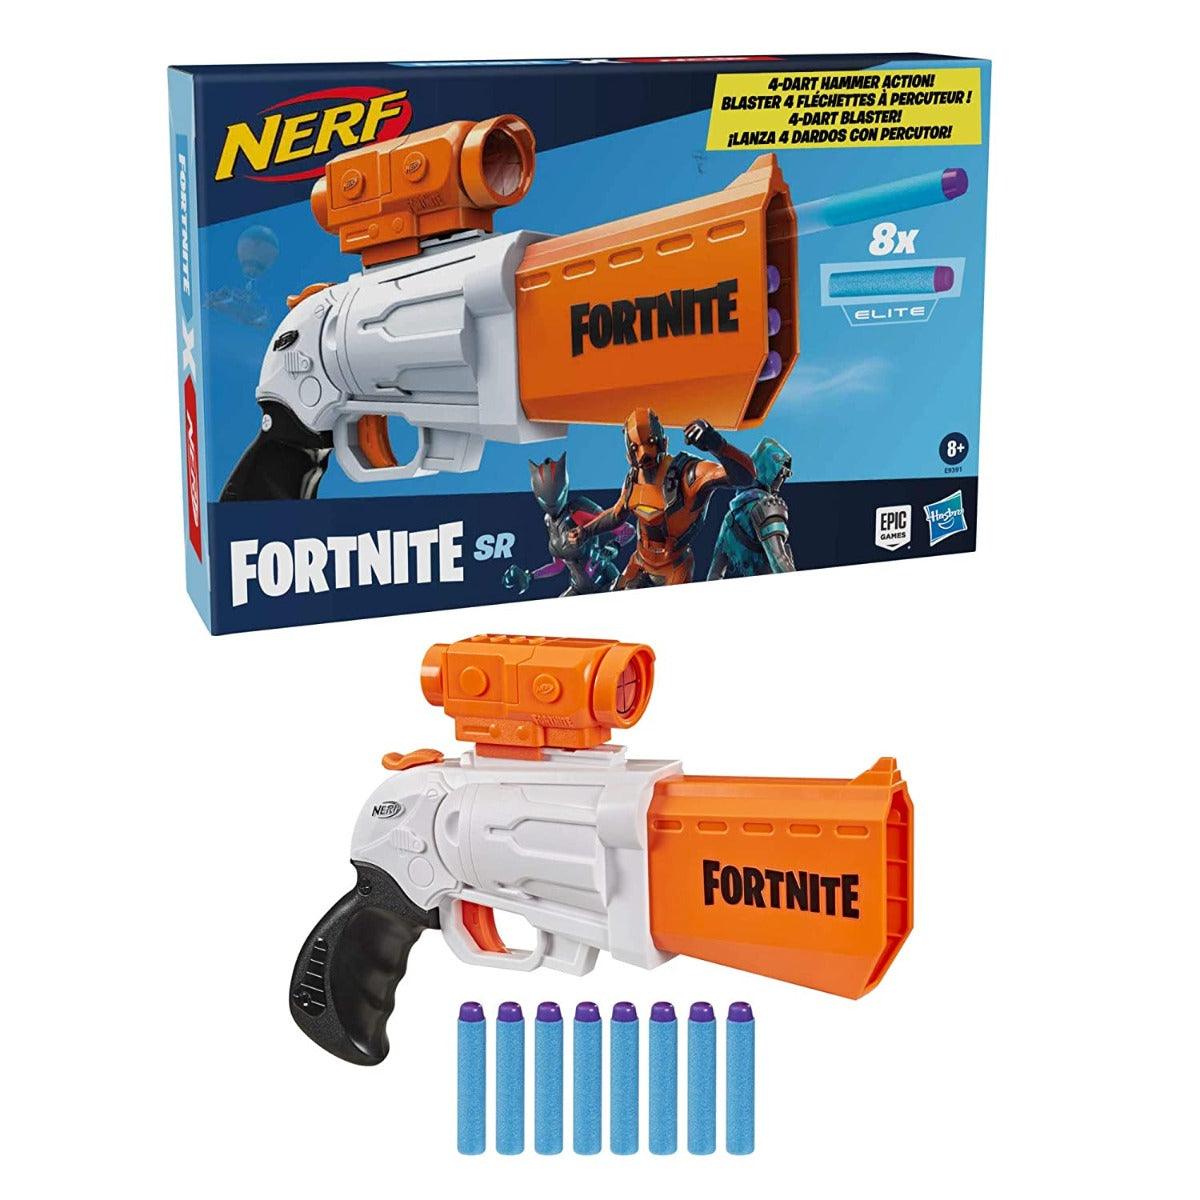 Nerf Fortnite SR Blaster, 4-Dart Hammer Action, Includes Removable Scope and 8 Elite Darts, for Youth, Teens, Adults